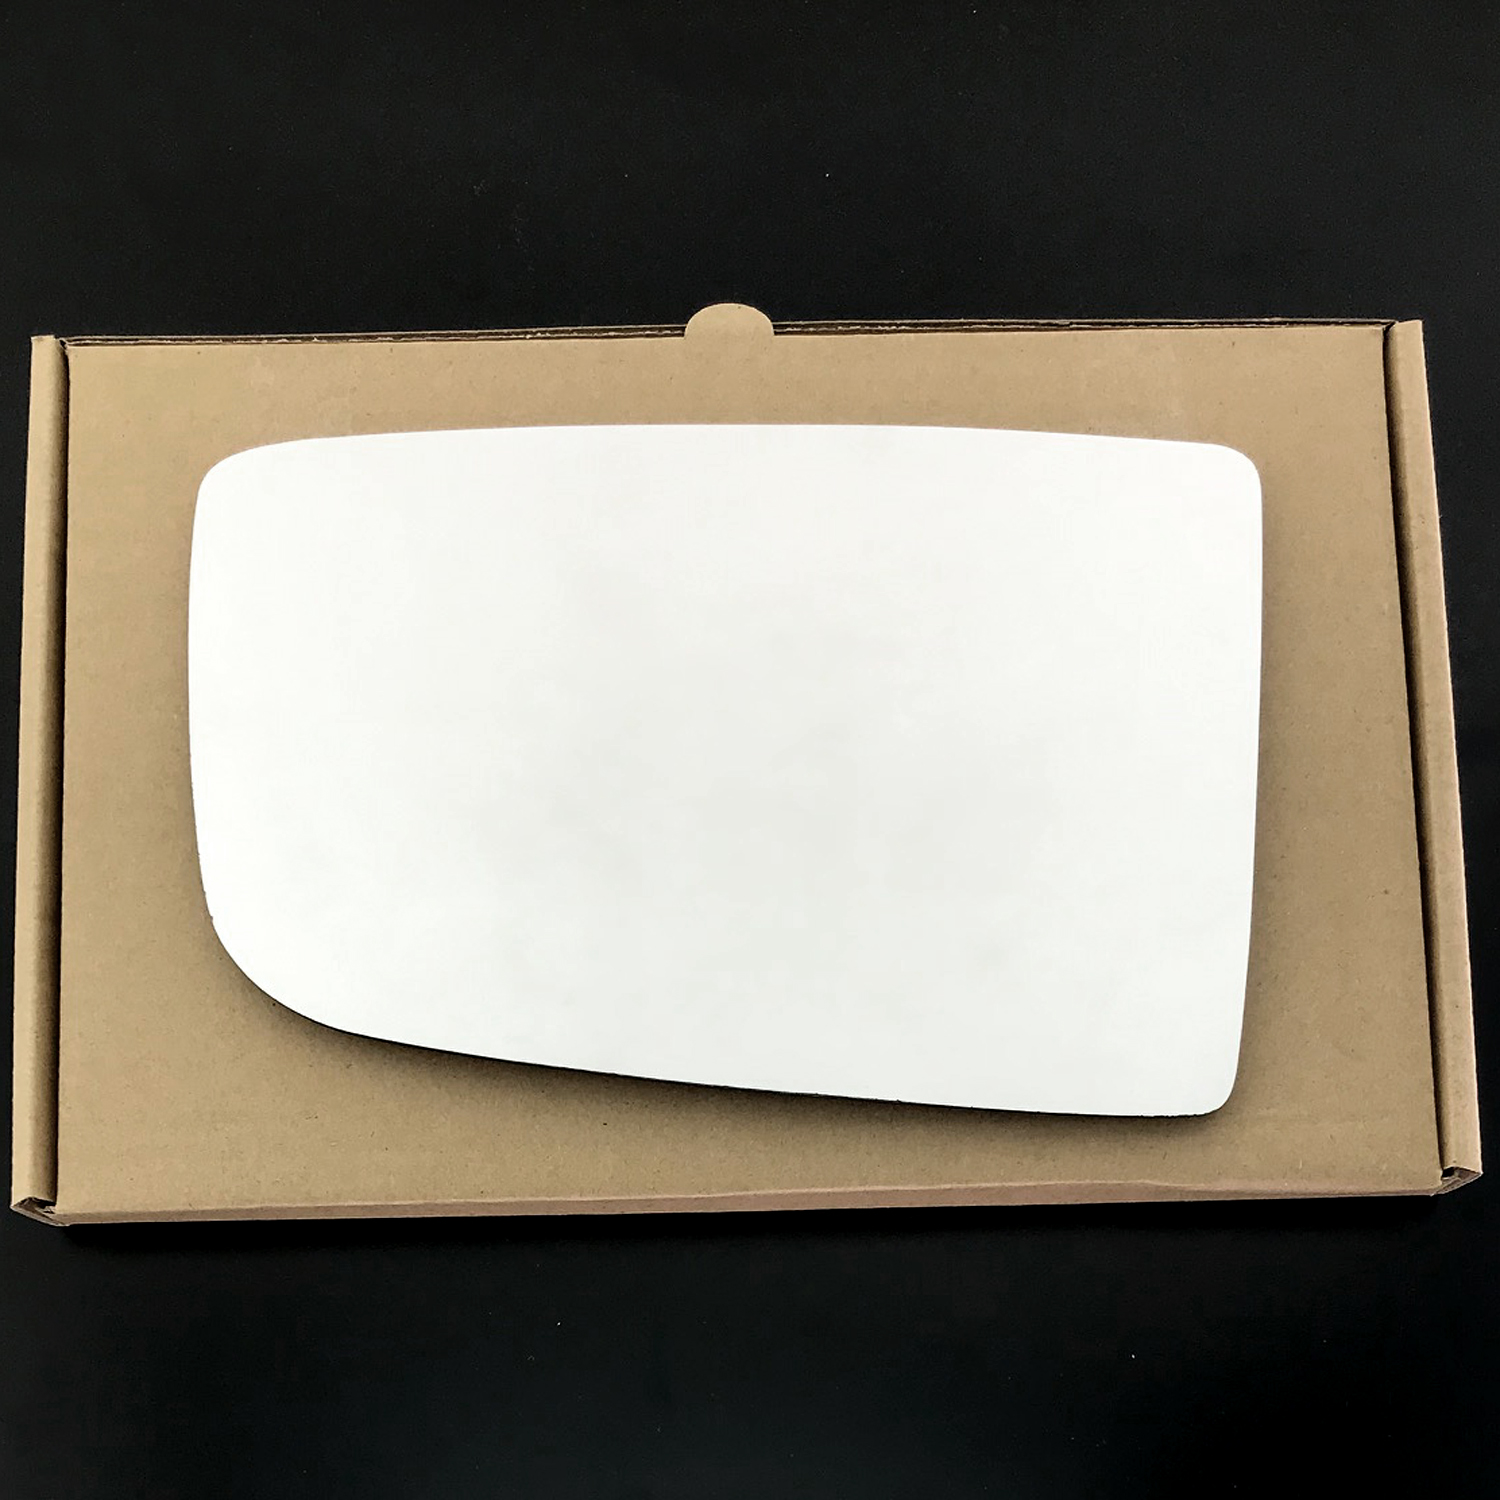 Mercedes Sprinter CHASSIS CAB Wing Mirror Glass LEFT HAND ( UK Passenger Side ) 2012 to 2017 – Convex Wing Mirror